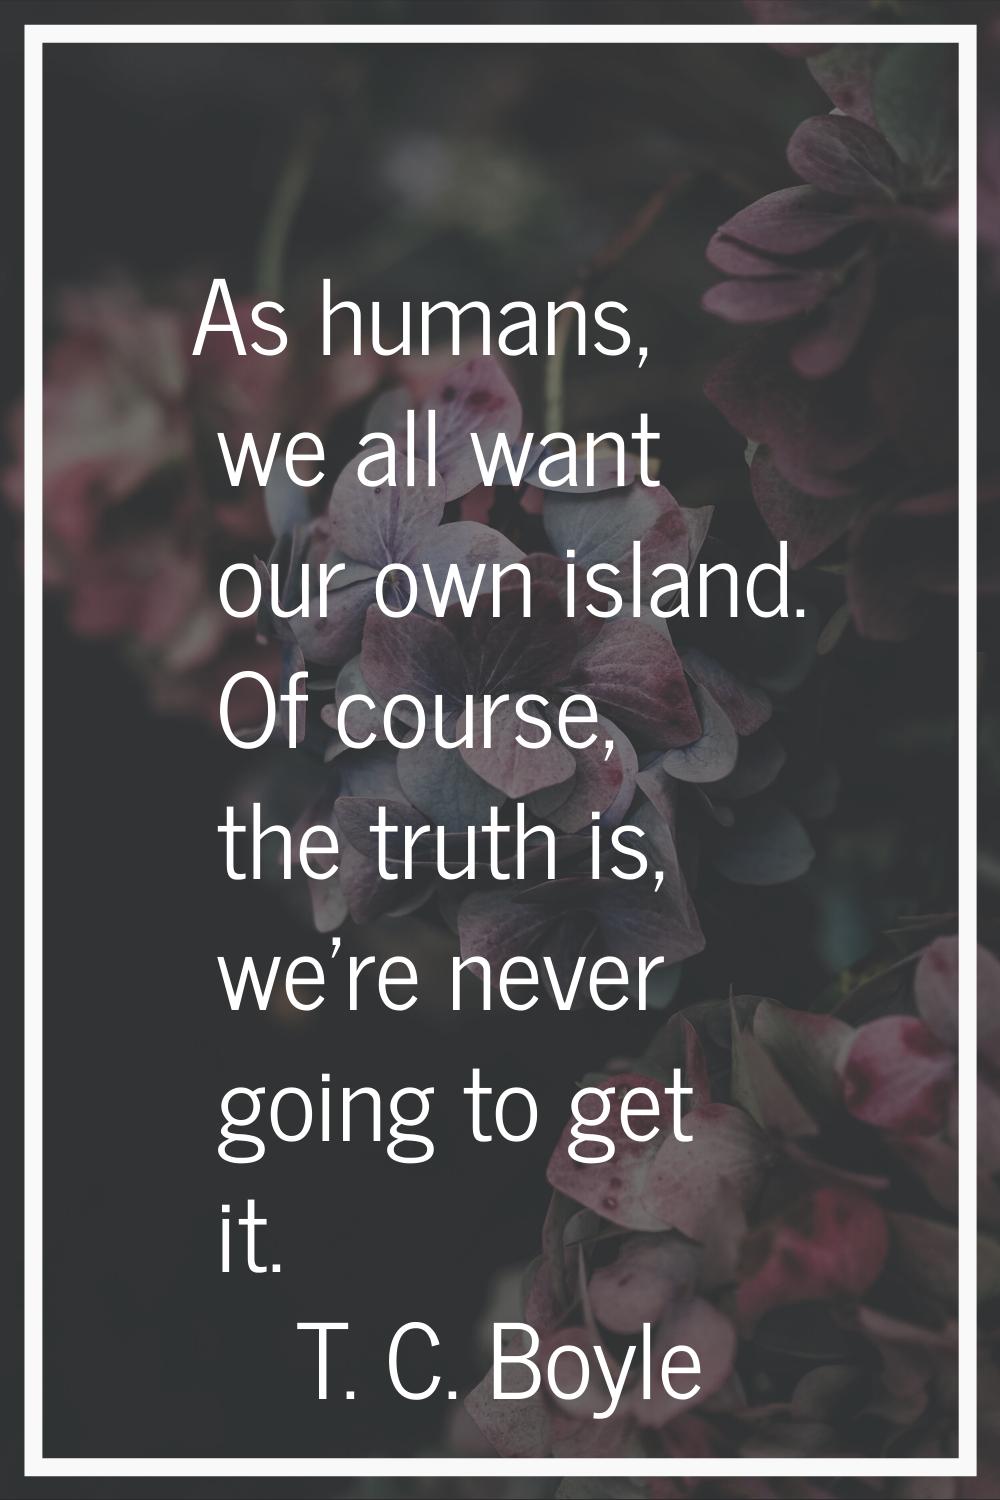 As humans, we all want our own island. Of course, the truth is, we're never going to get it.